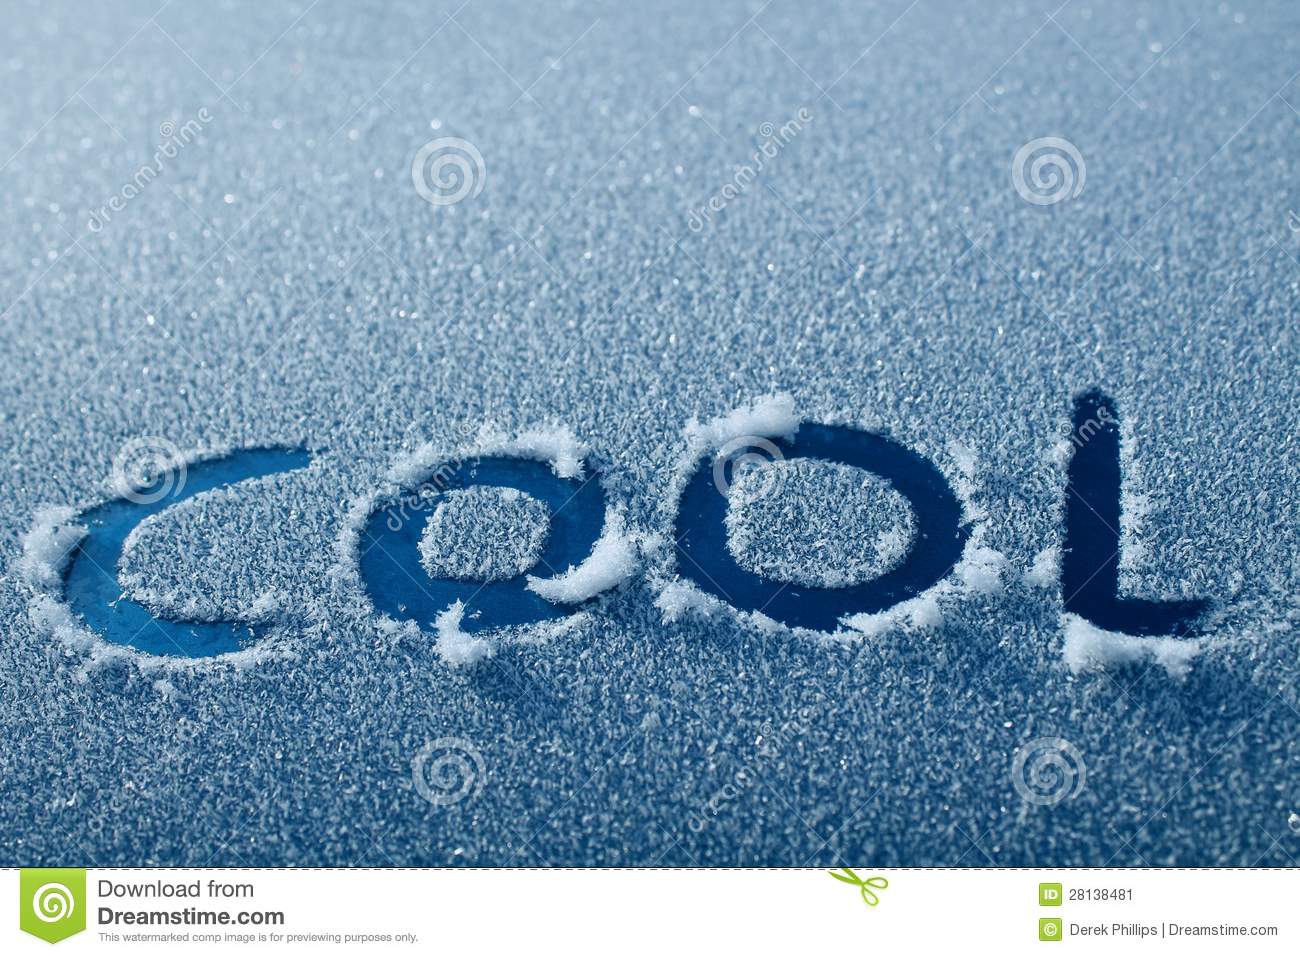 The Word Cool Written In Frost On A Blue Car